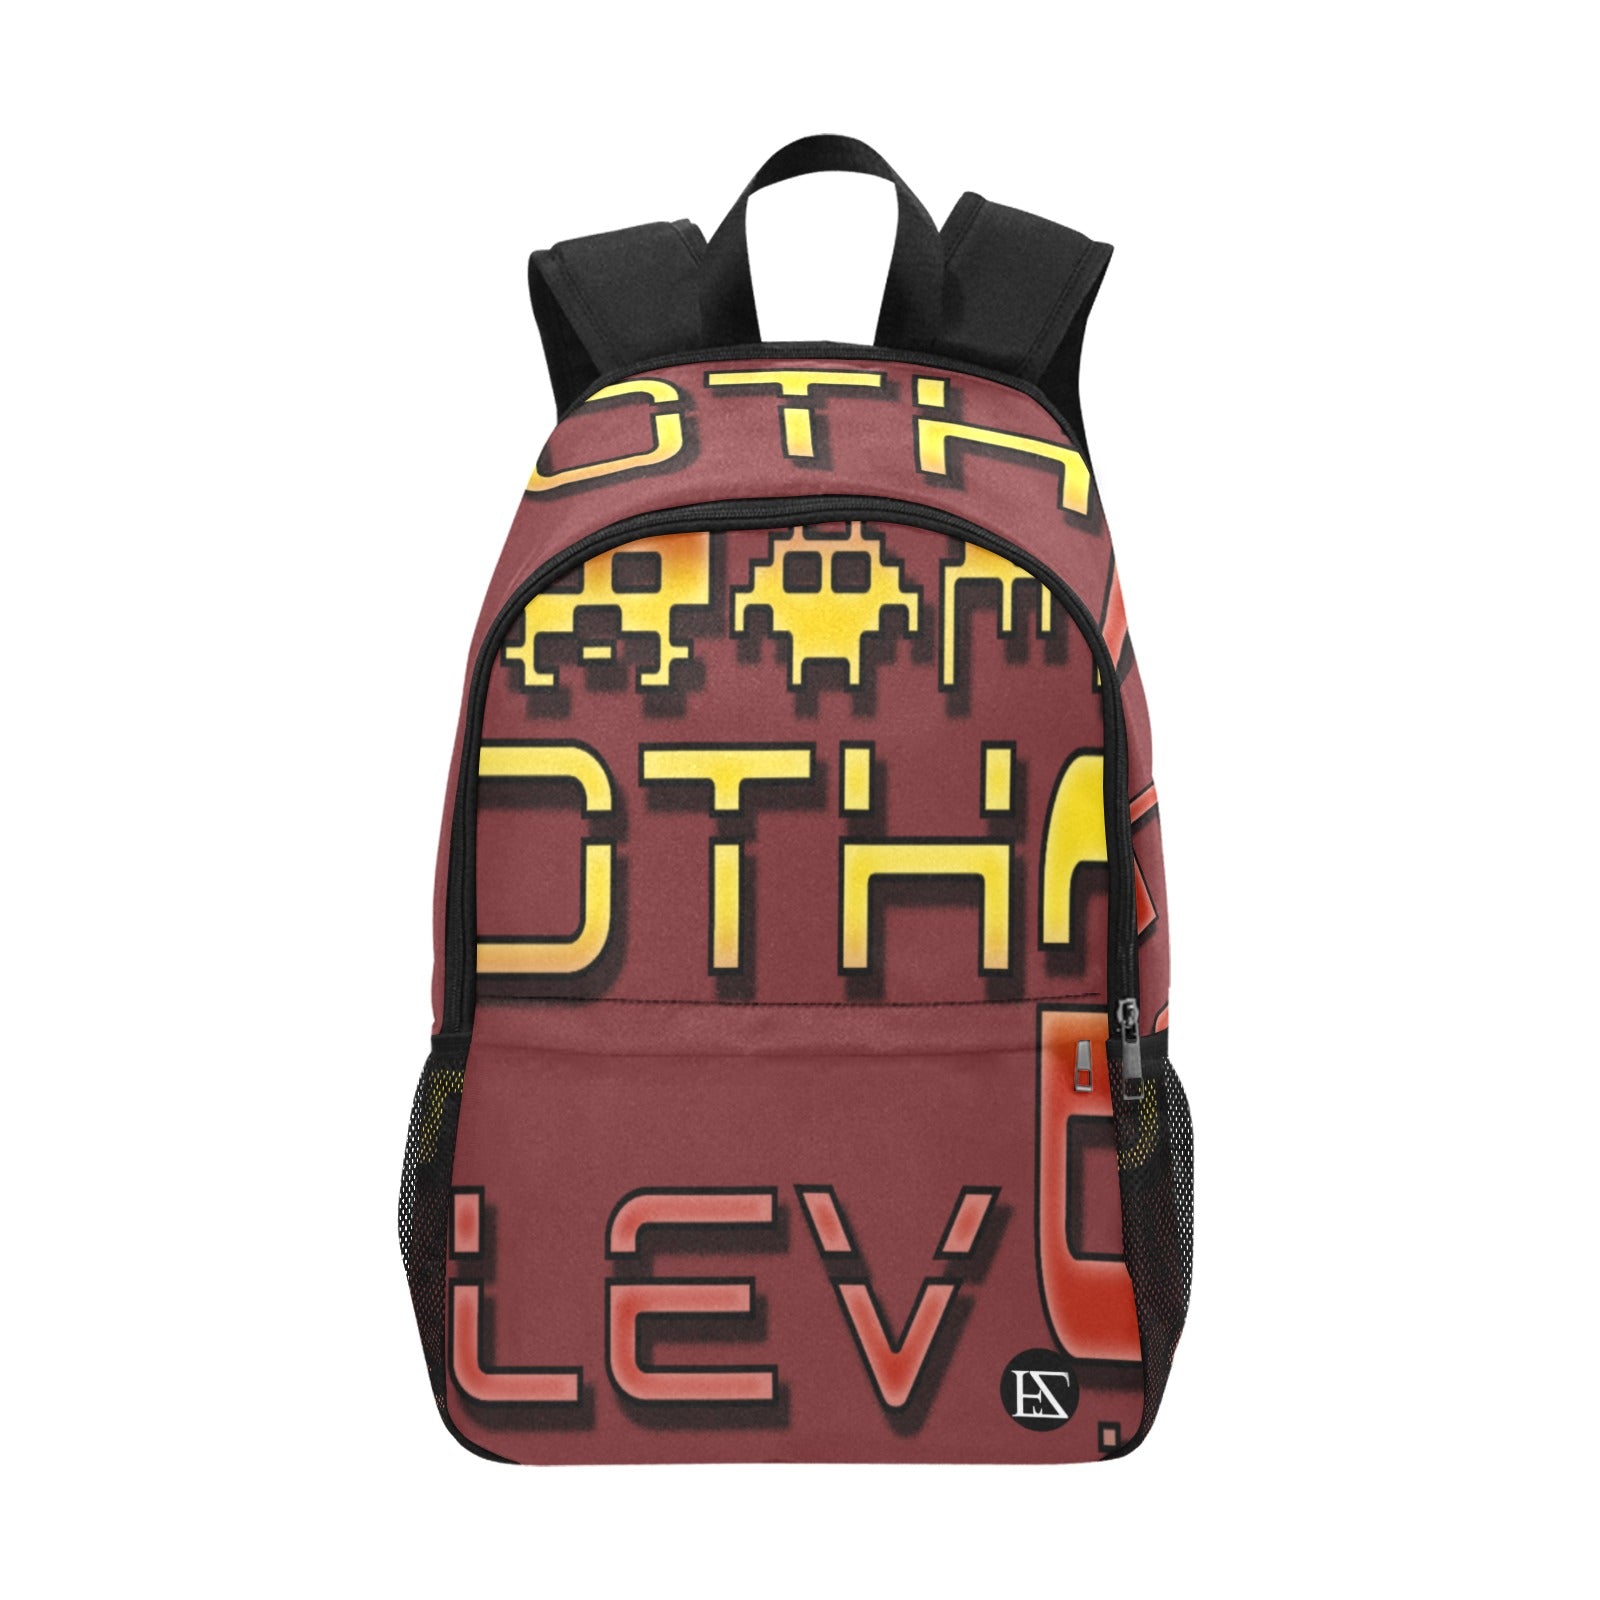 fz red levels backpack one size / fz levels backpack - burgundy all-over print unisex casual backpack with side mesh pockets (model 1659)